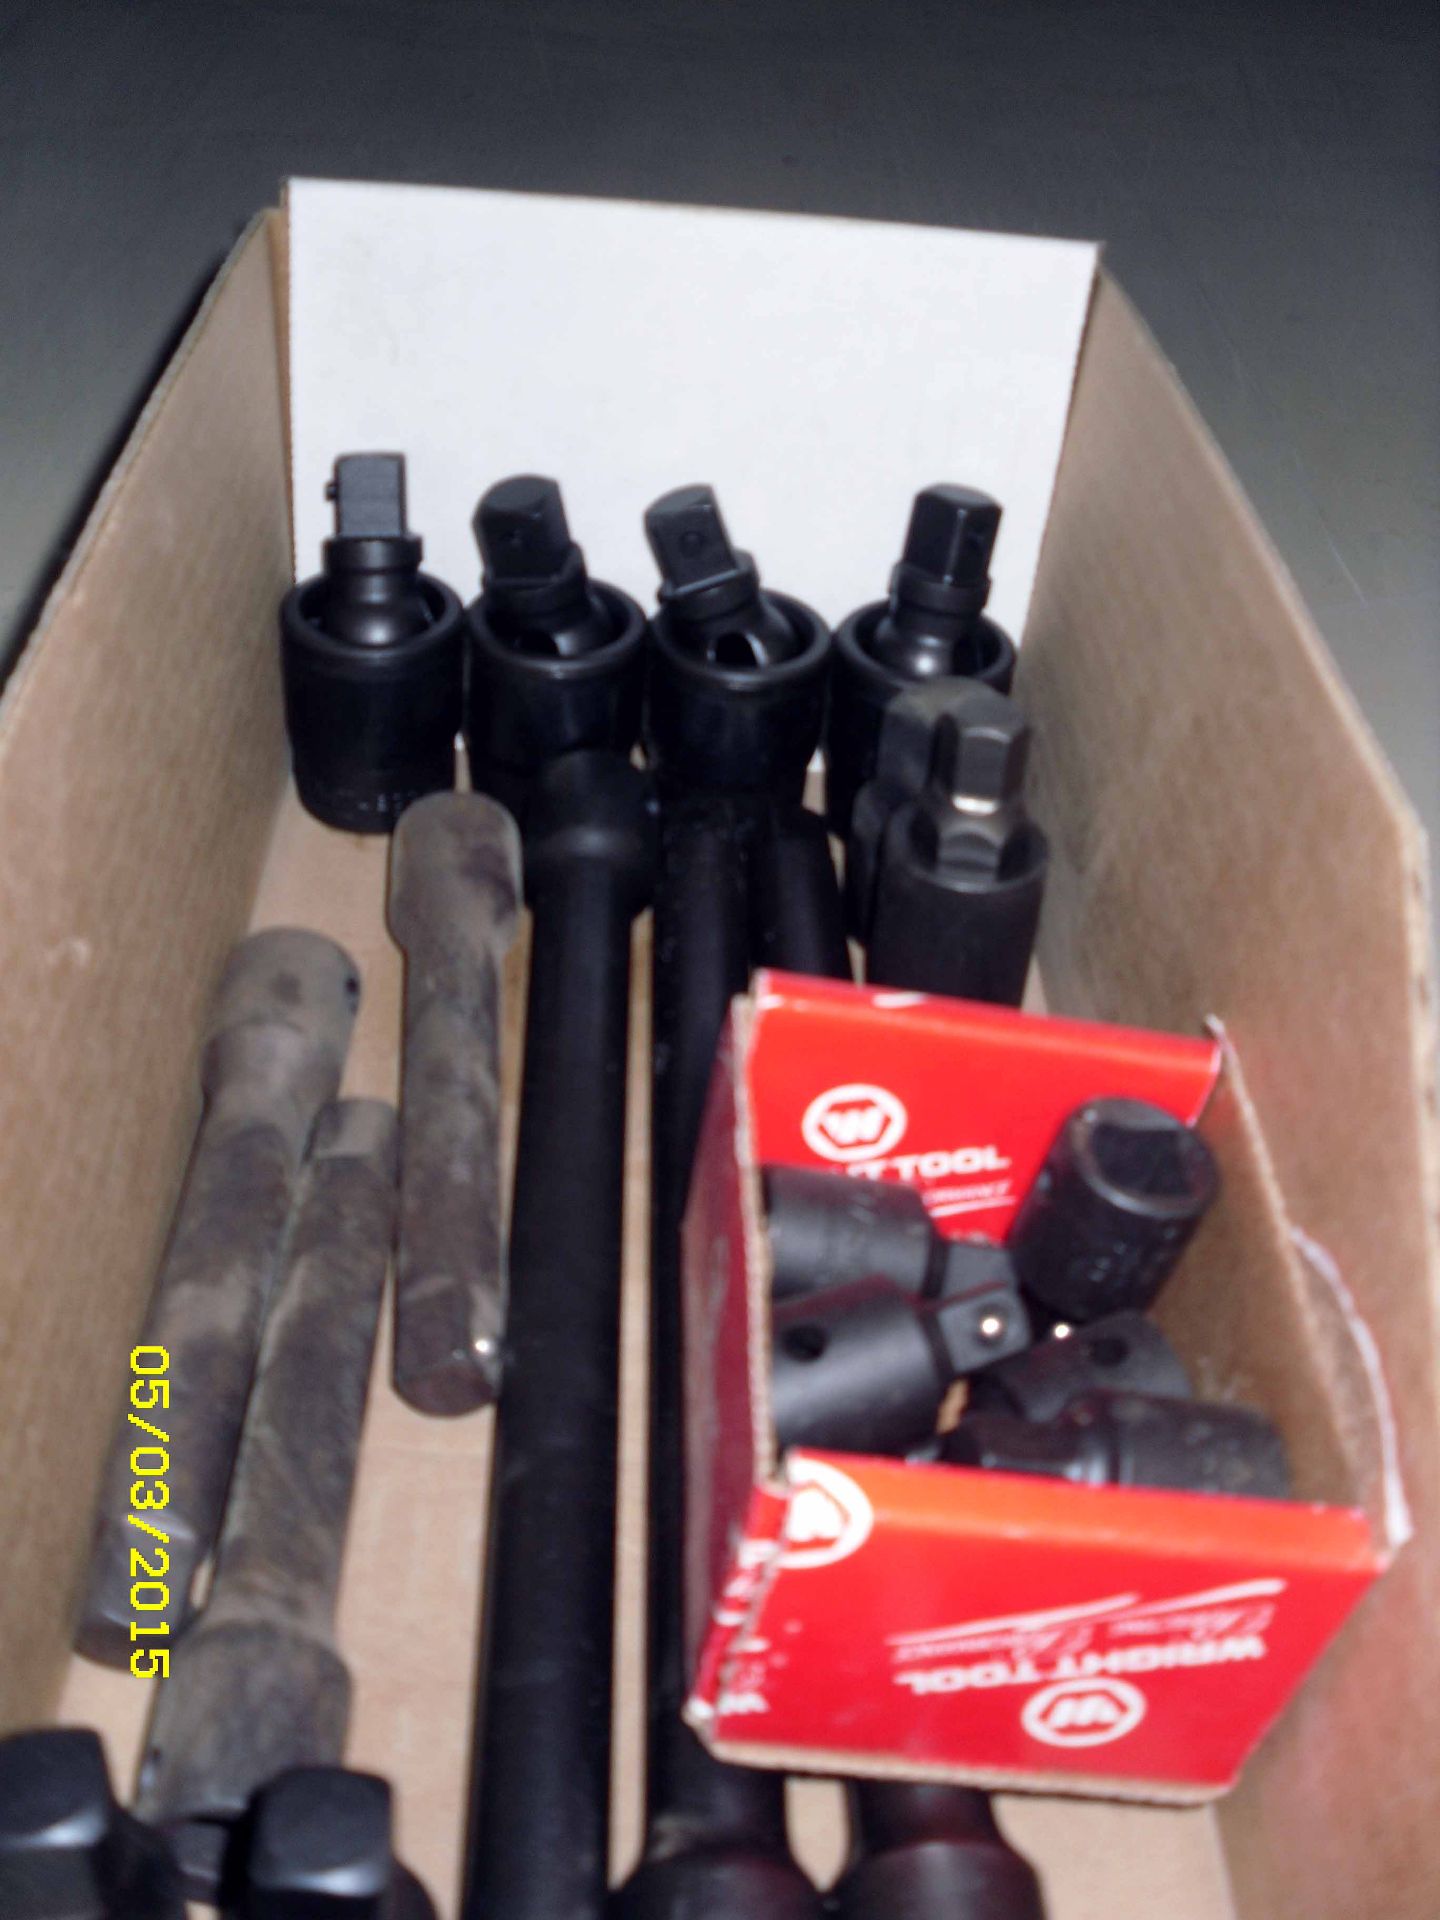 LOT CONSISTING OF WRIGHT TOOL IMPACT 1/2" DRIVE EXTENSIONS, REDUCERS & UNIVERSAL JOINTS, assorted